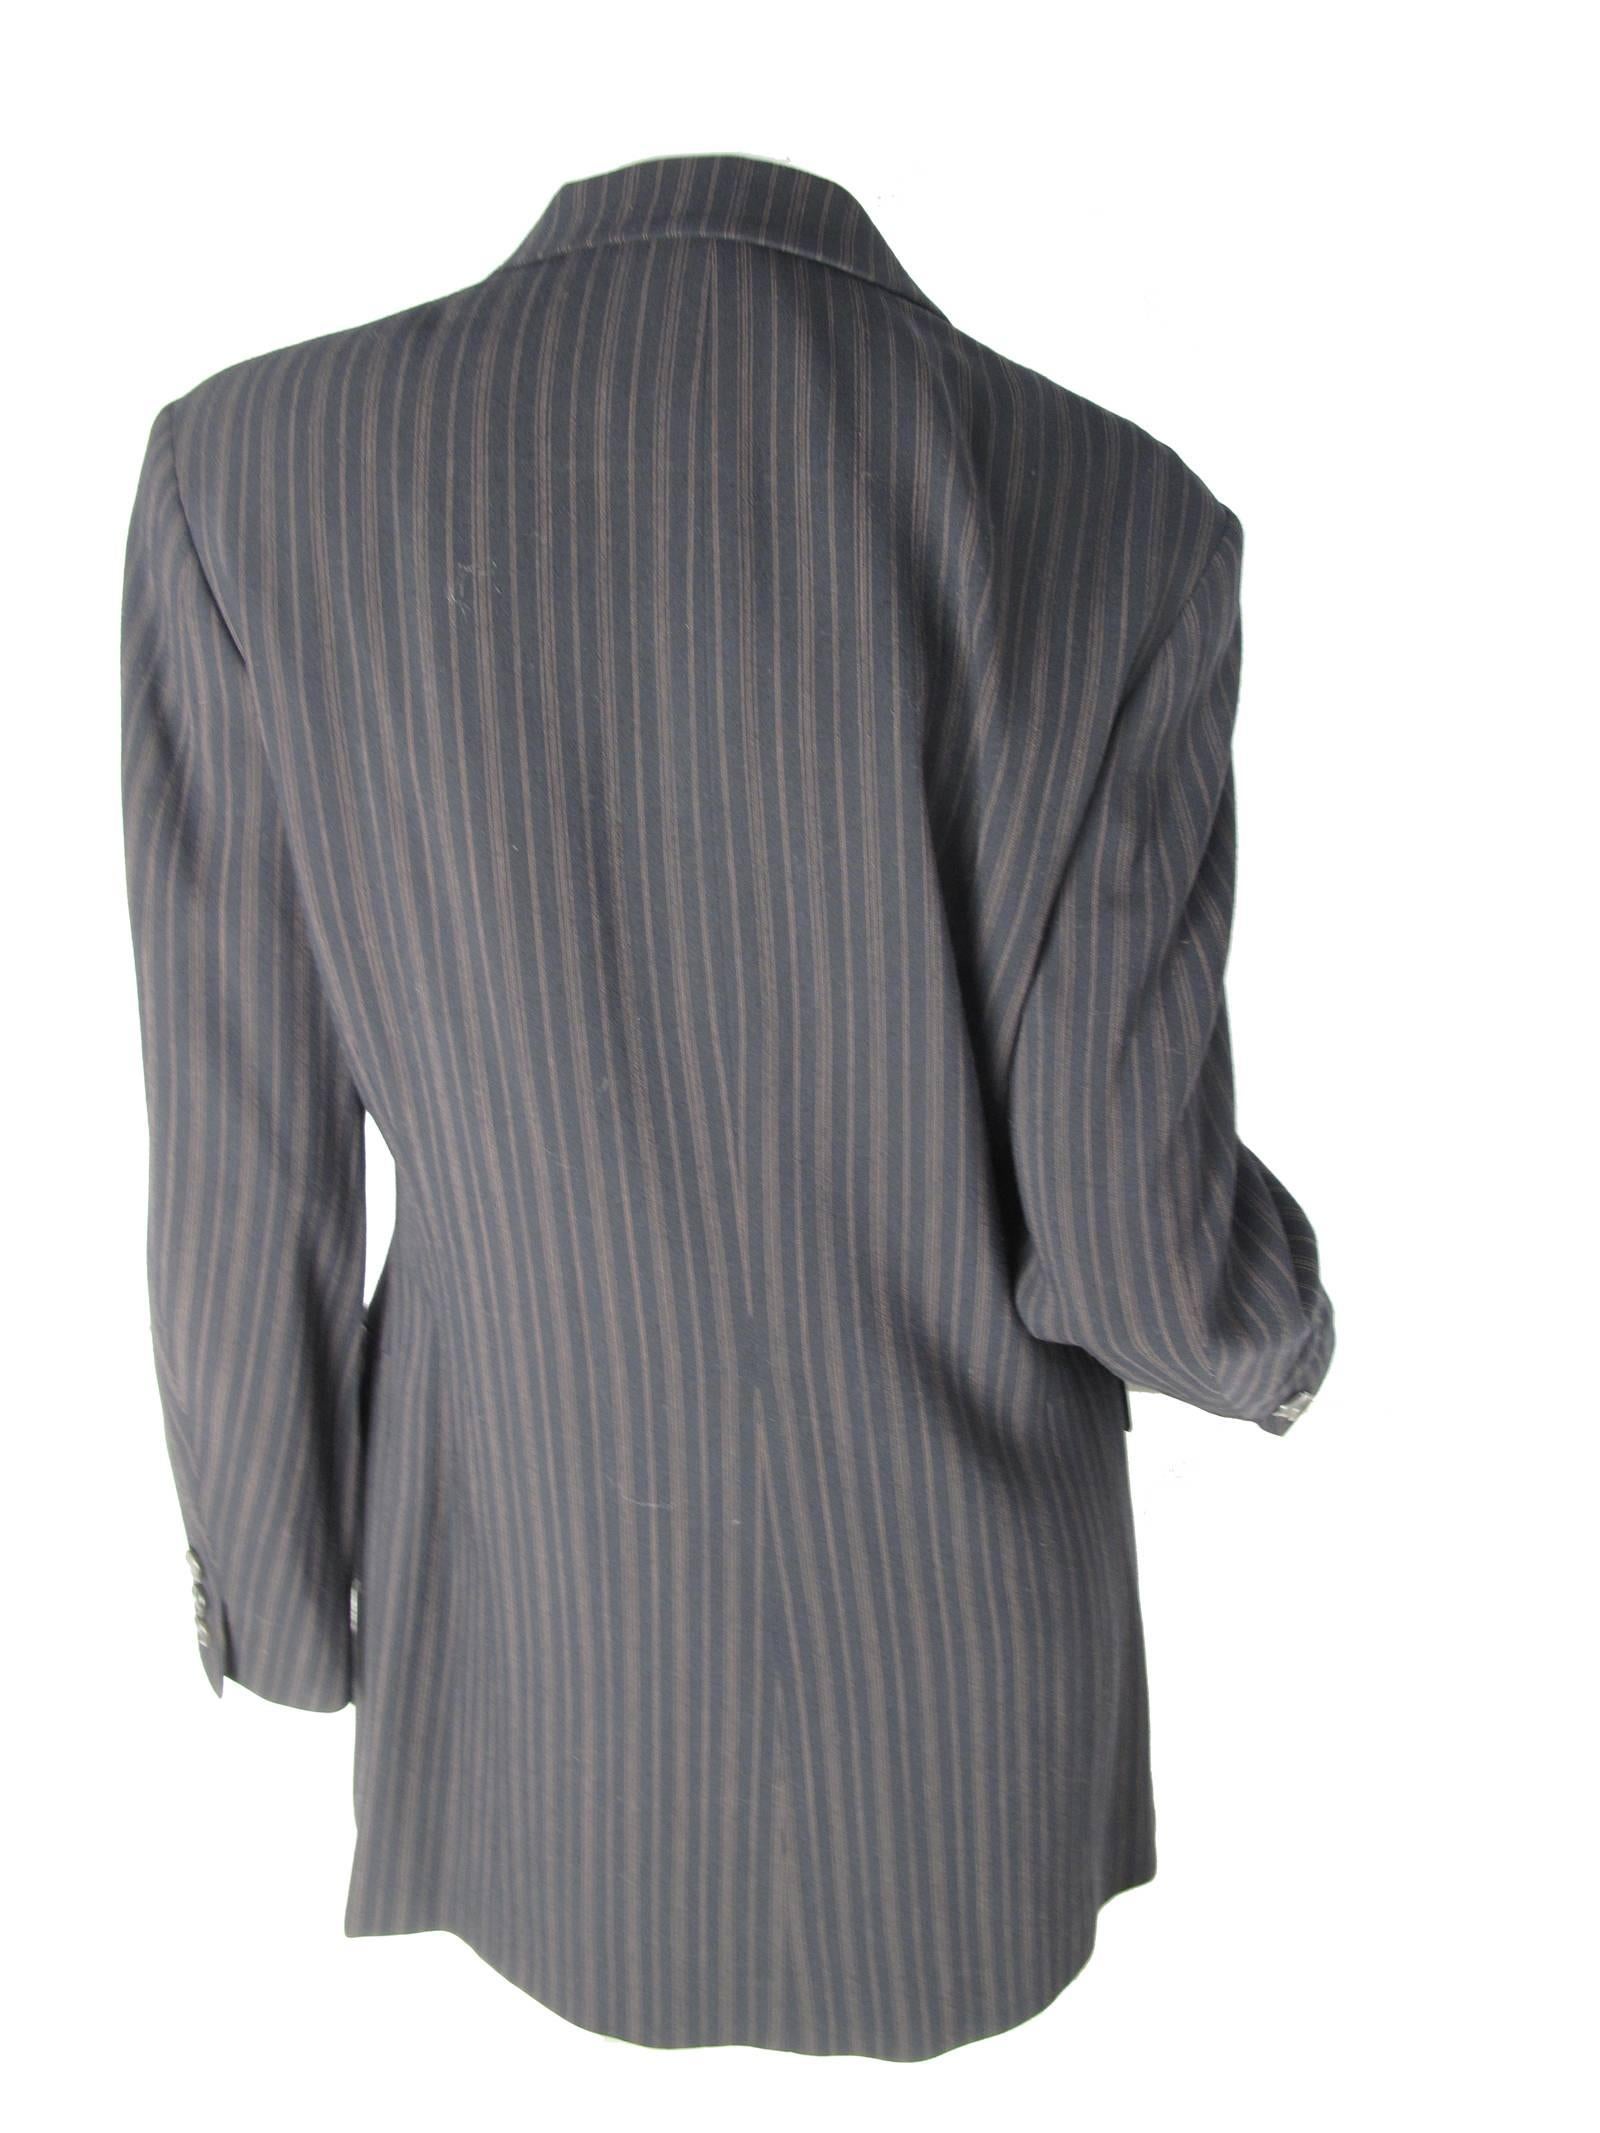 Jil Blazer pinstriped wool blazer, two front pockets, buttons down front. Condition: Excellent. Size 38
39